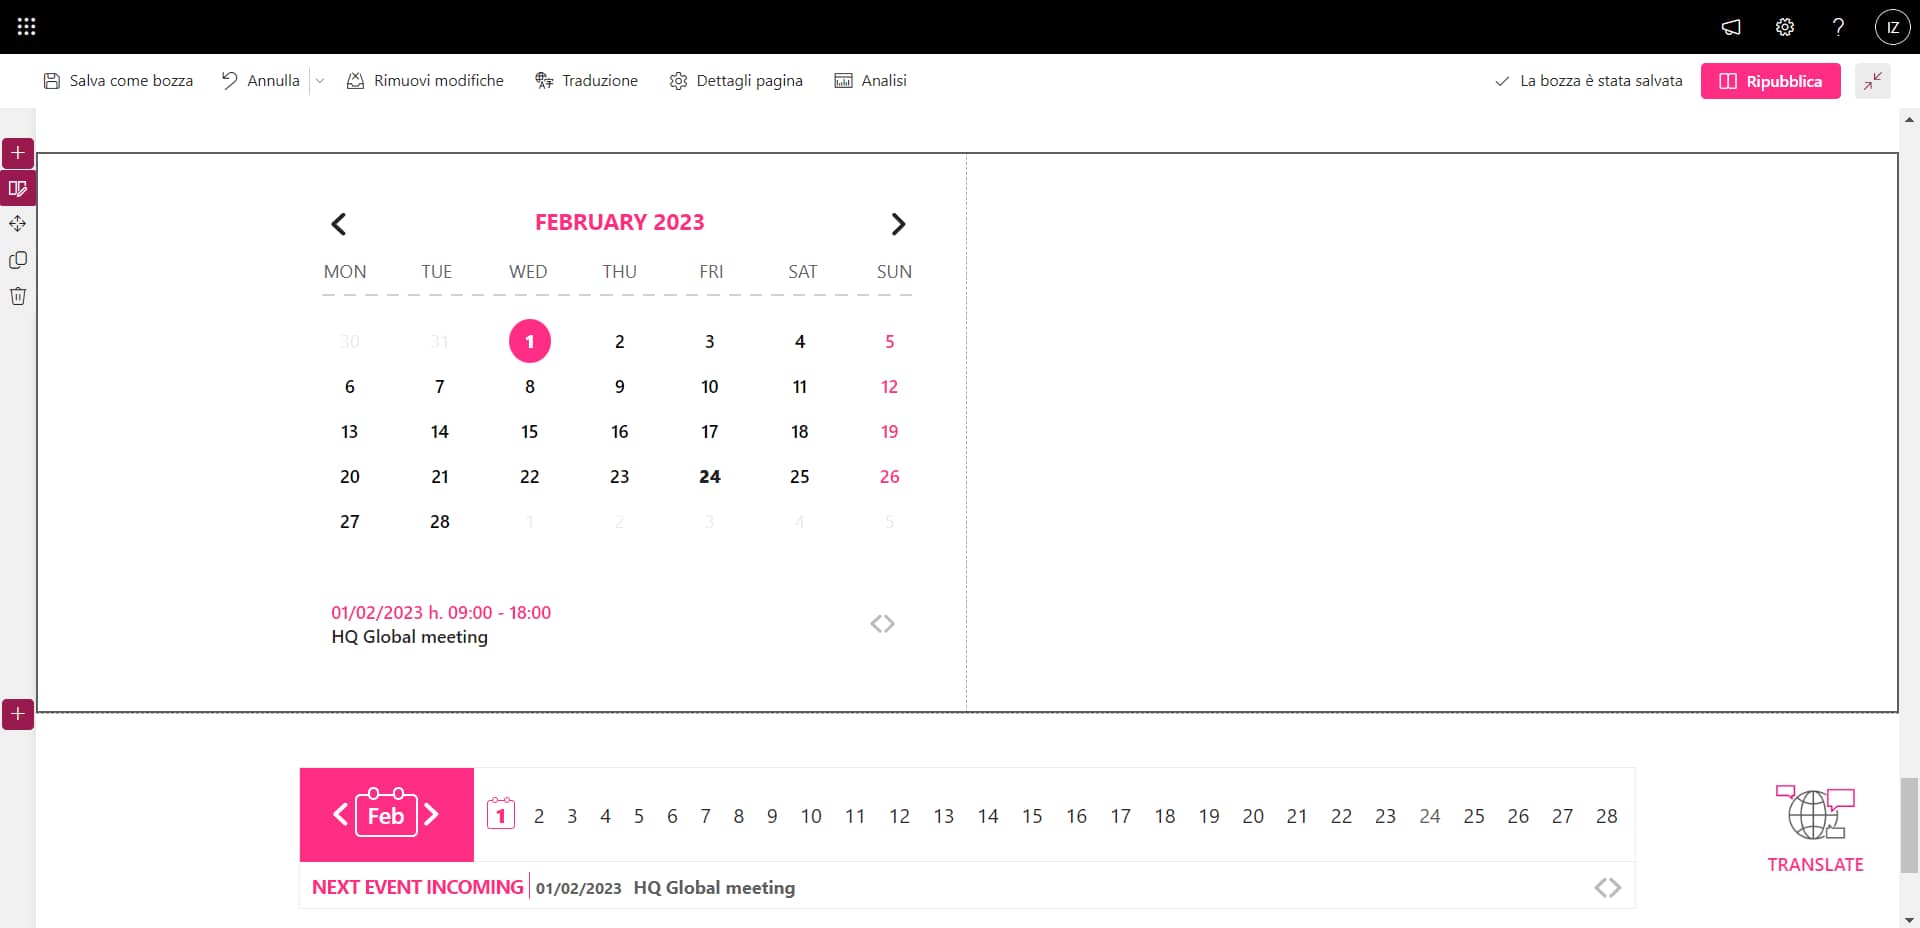 Exploded and reduced view of the Calendar